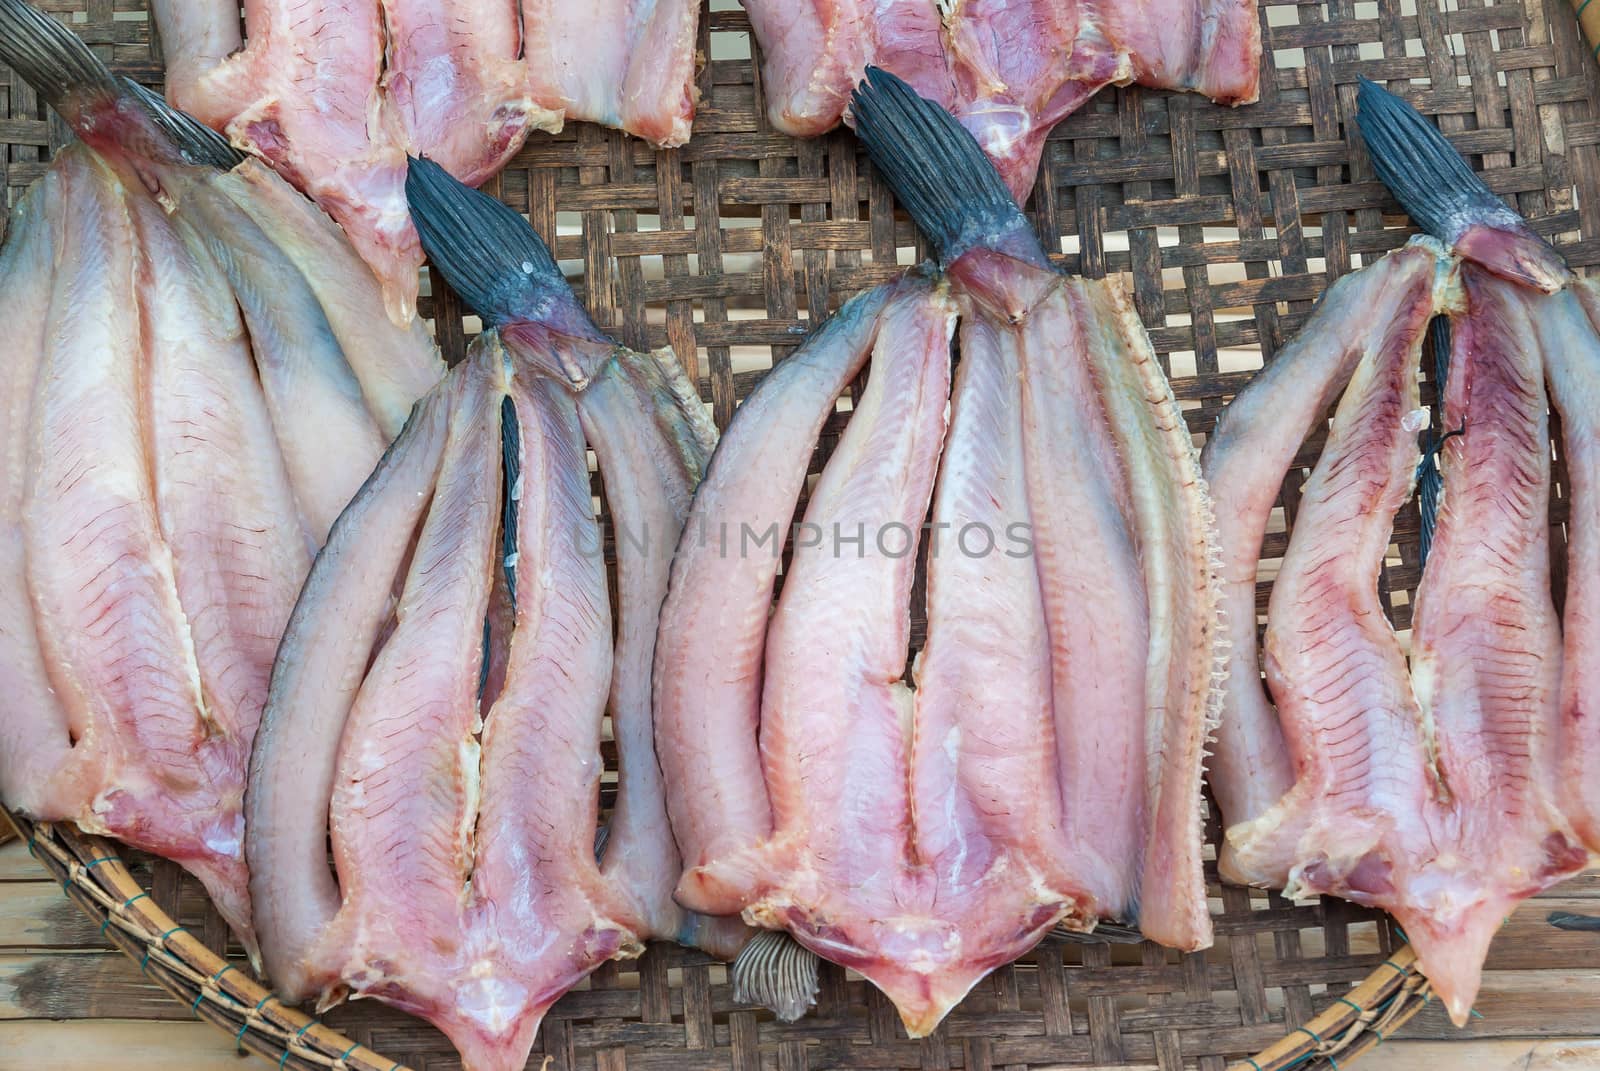 Dried fishs of local food at open market.